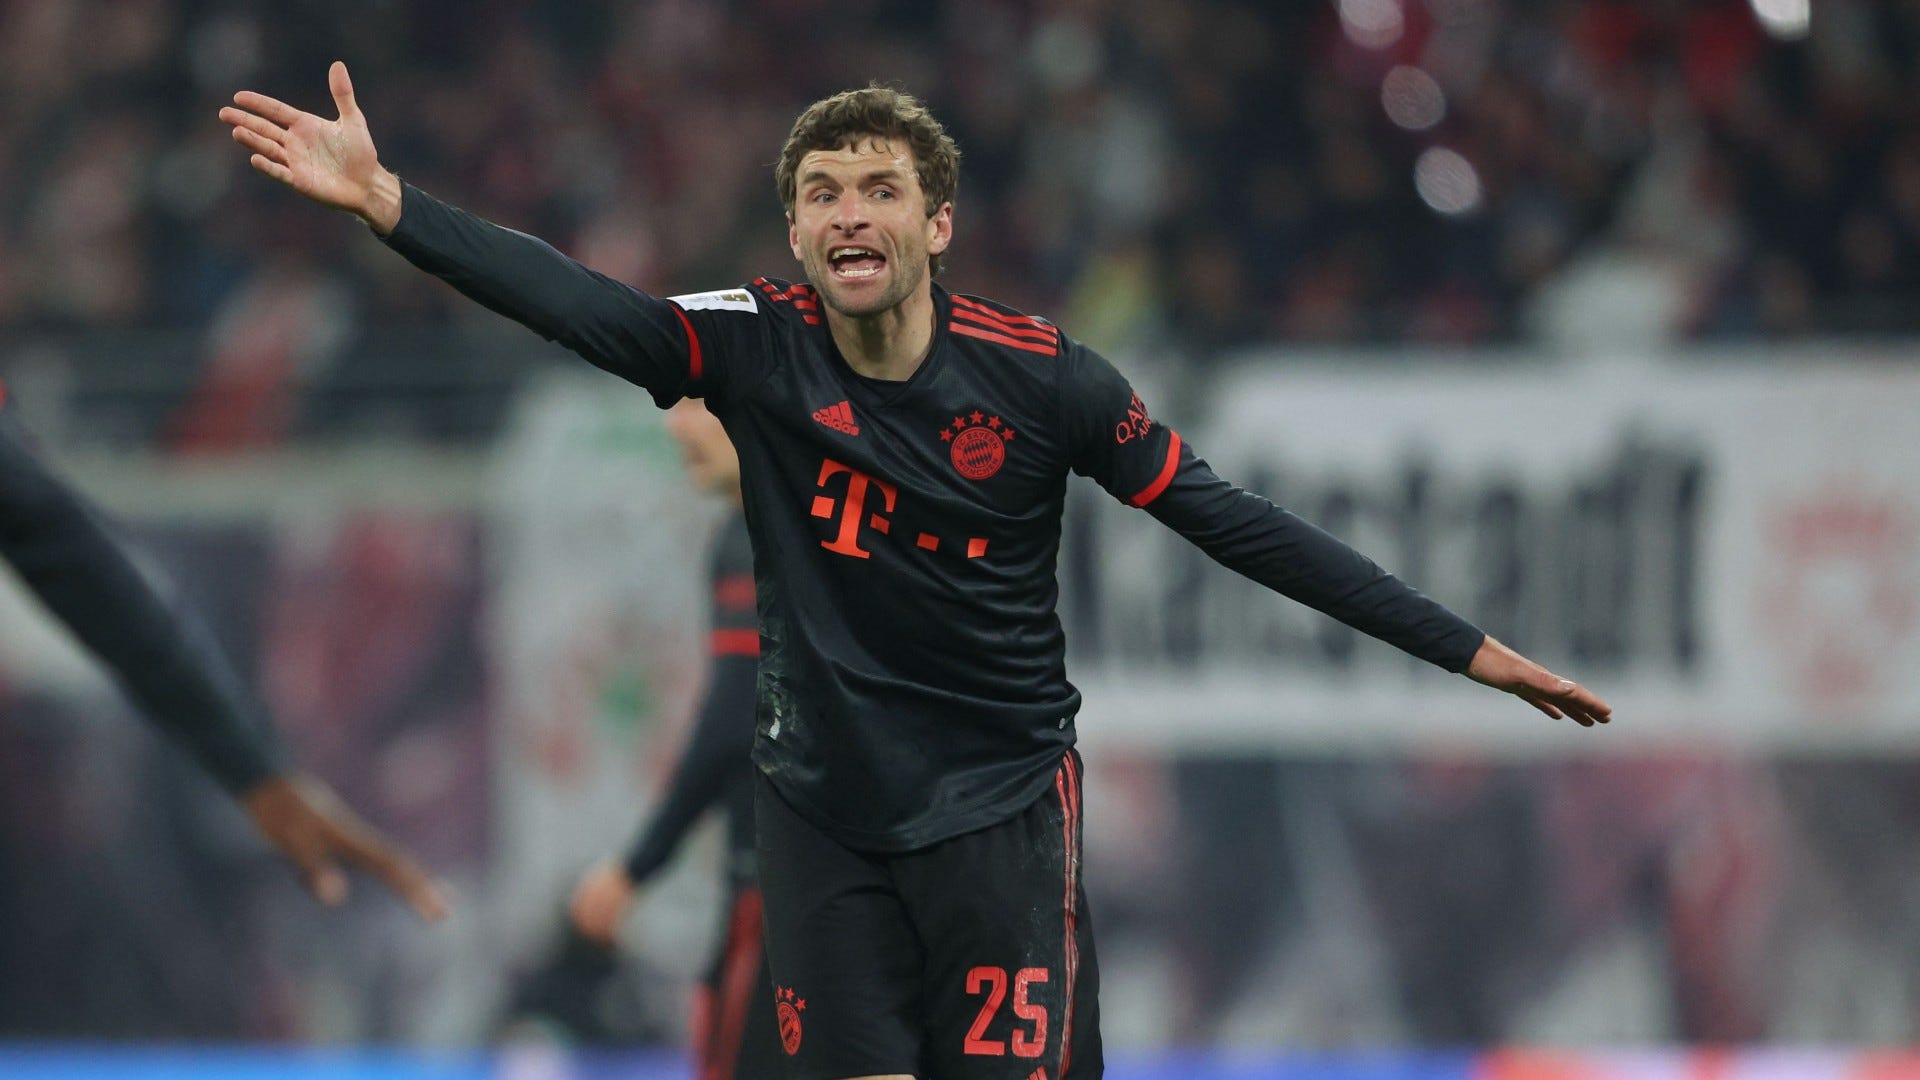 Bayern Munich vs Frankfurt Live stream, TV channel, kick-off time and where to watch Goal US